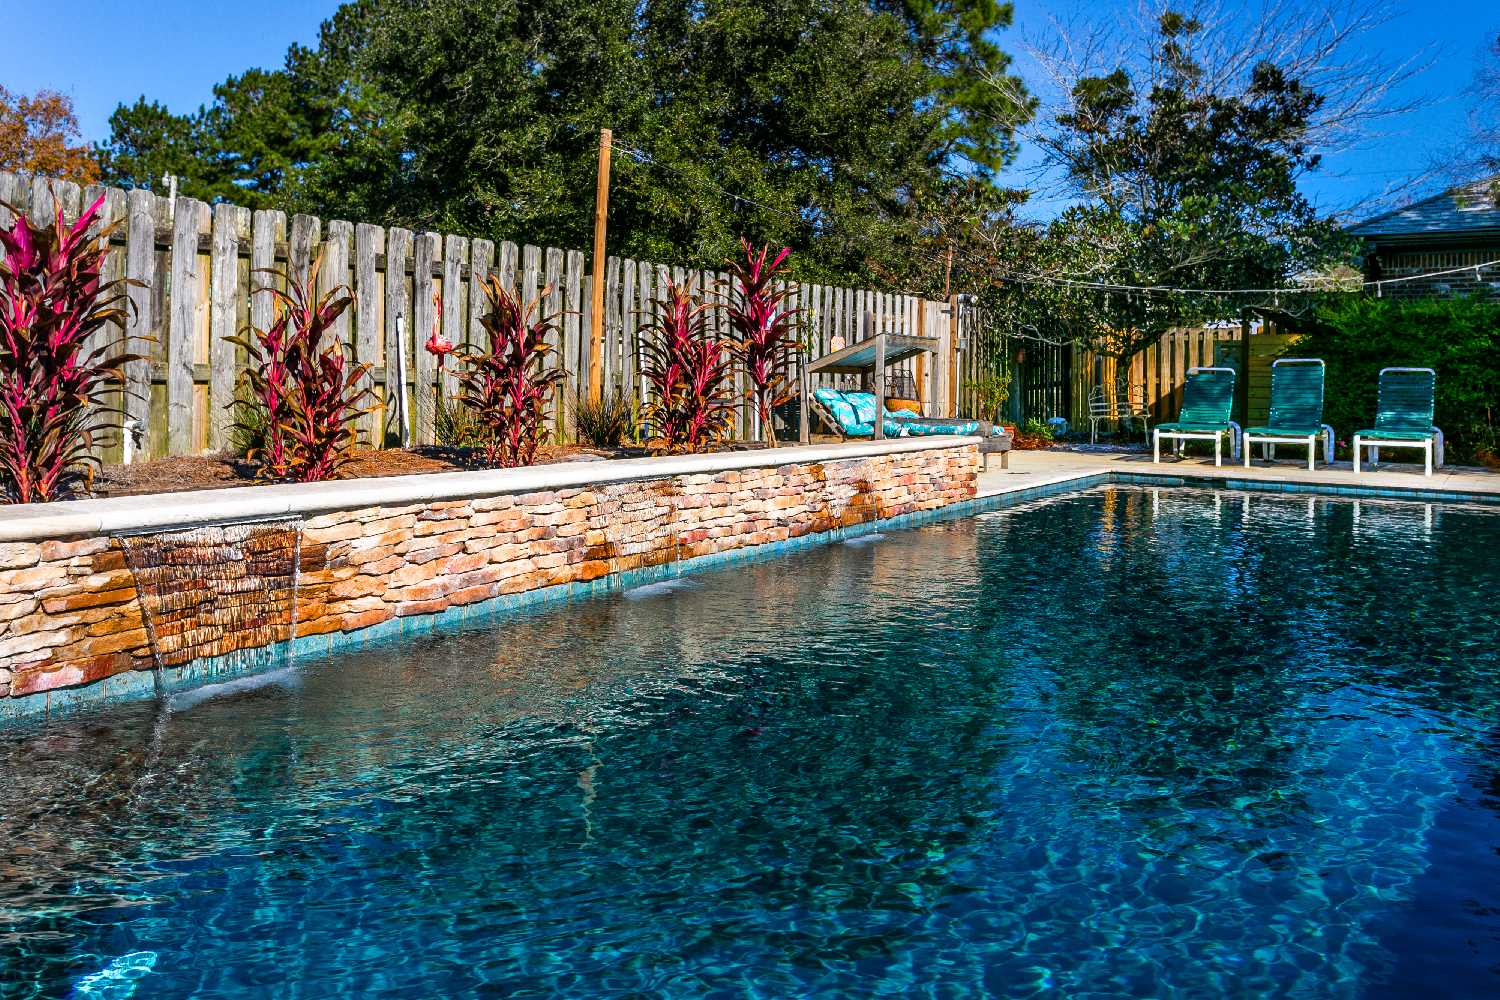 Pool Financing: Finding Financing For the Pool of Your Dreams